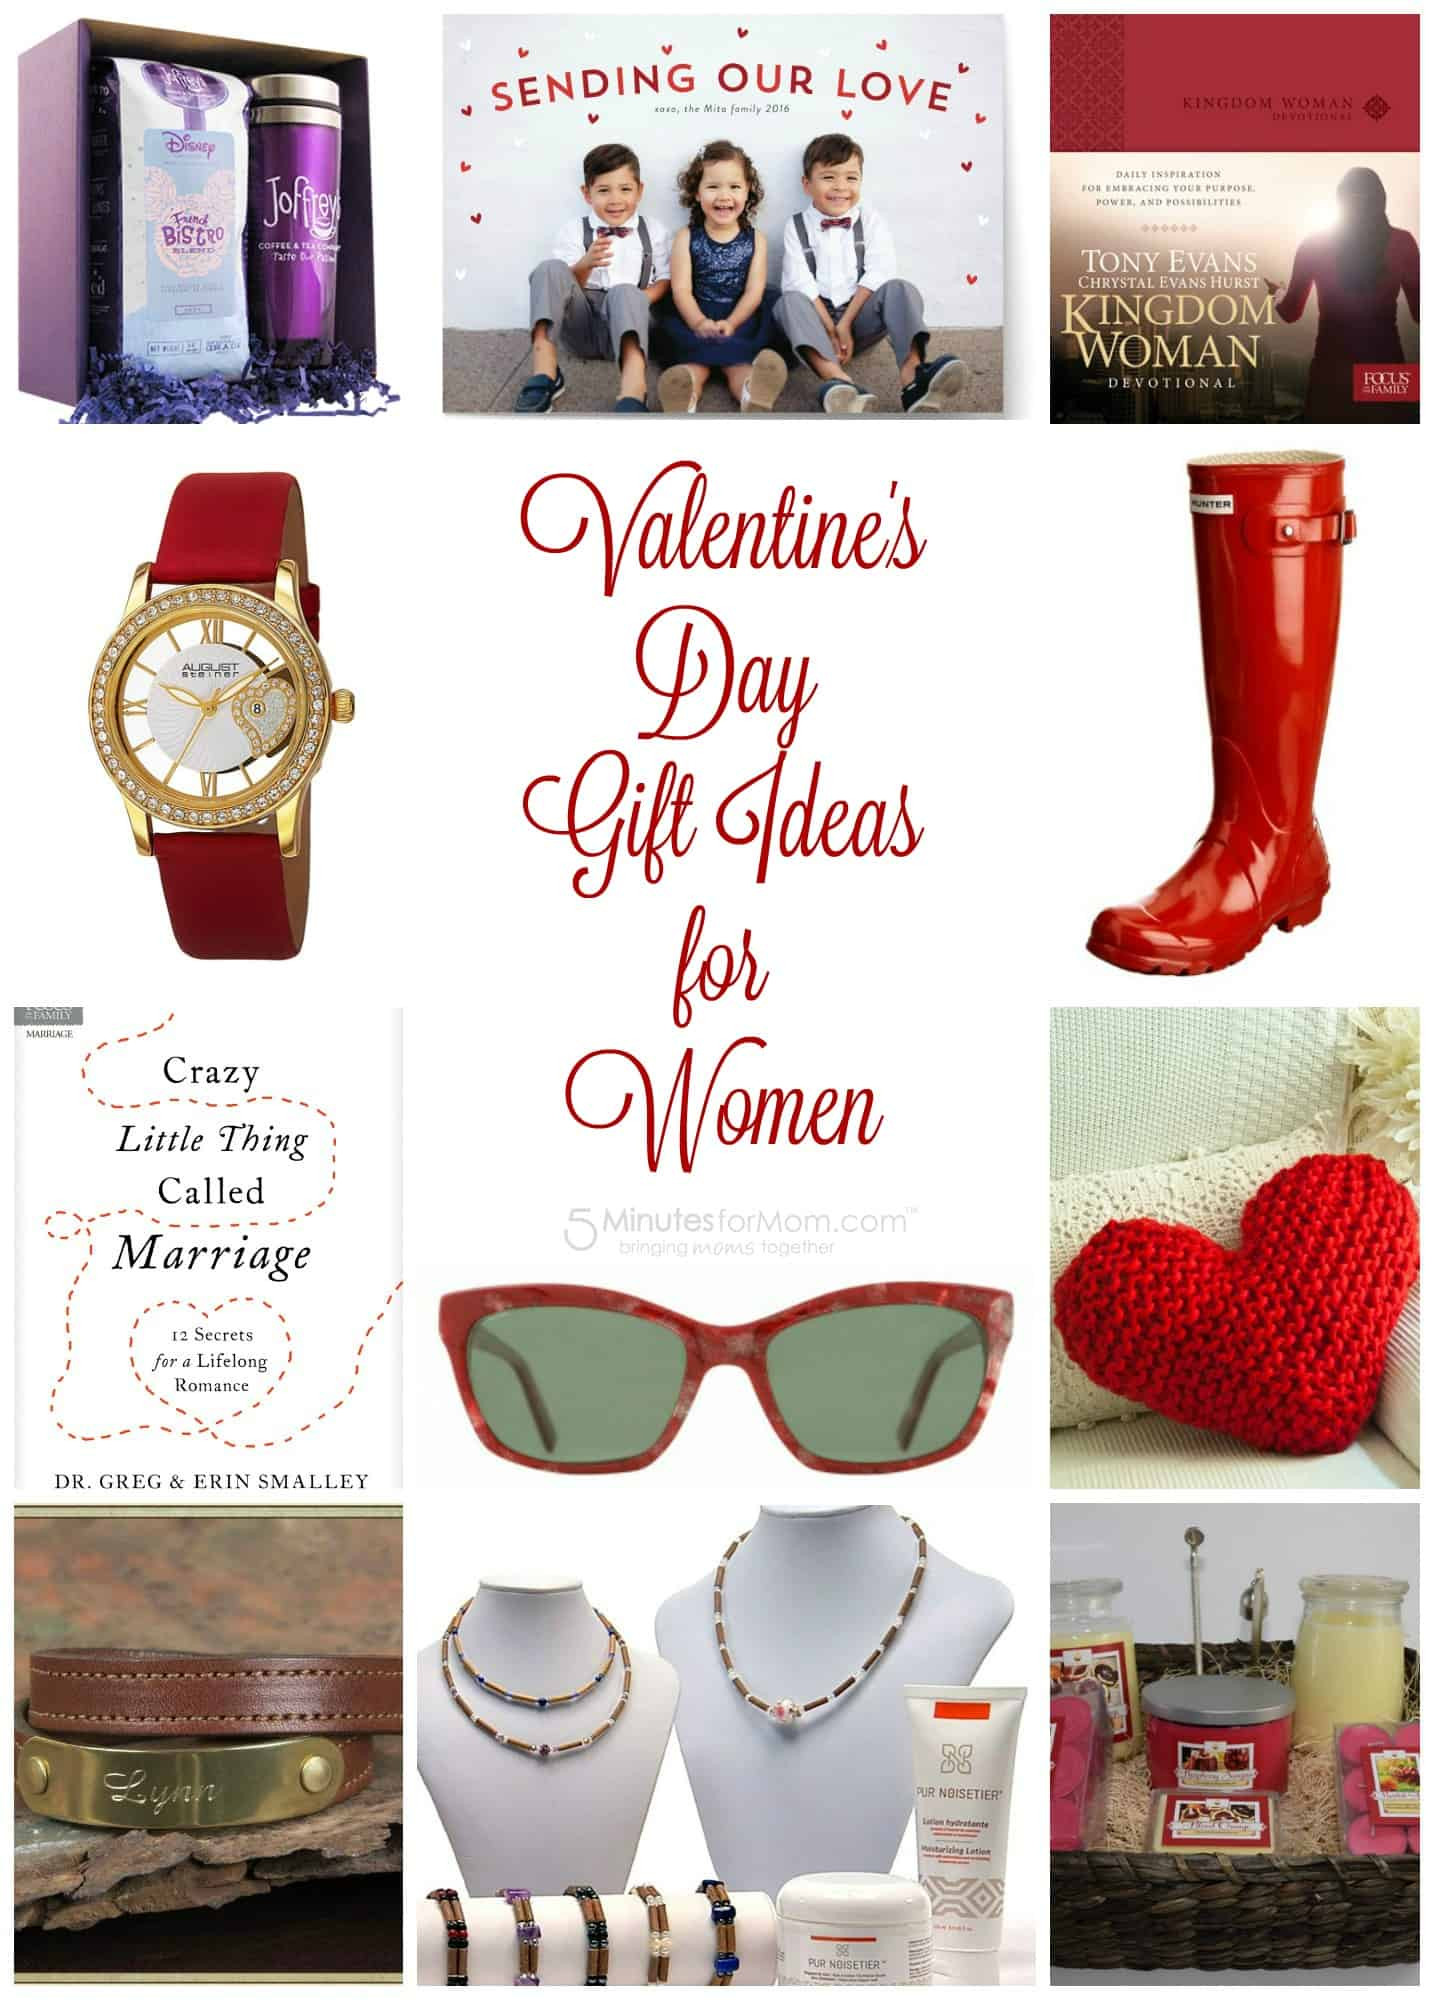 Valentine Day Gift Ideas for Women Beautiful Valentine S Day Gift Guide for Women Plus $100 Amazon